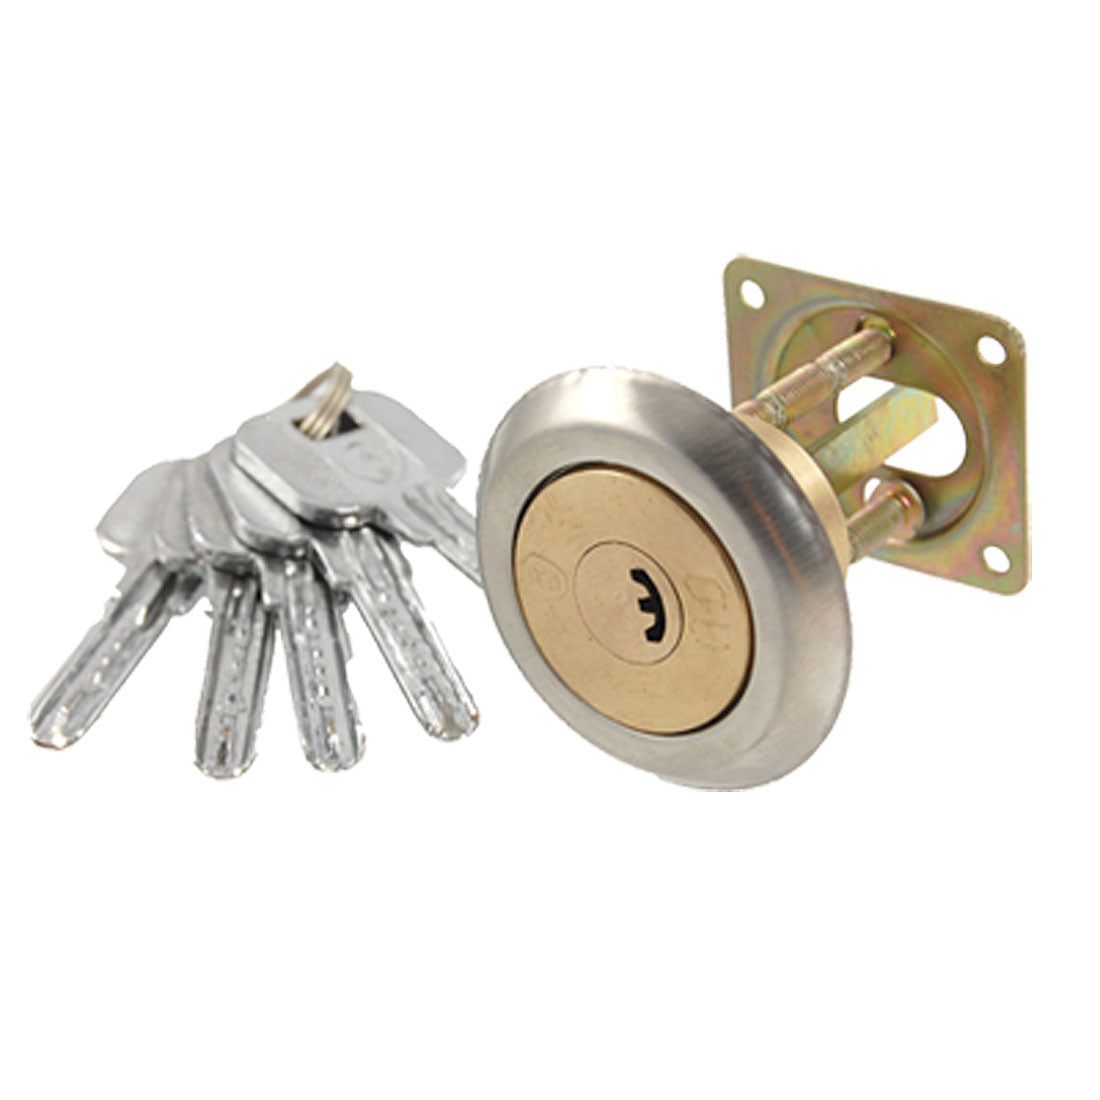 uxcell Uxcell Garage Door Security Brass Tone Tapered Ned Lock W Keys